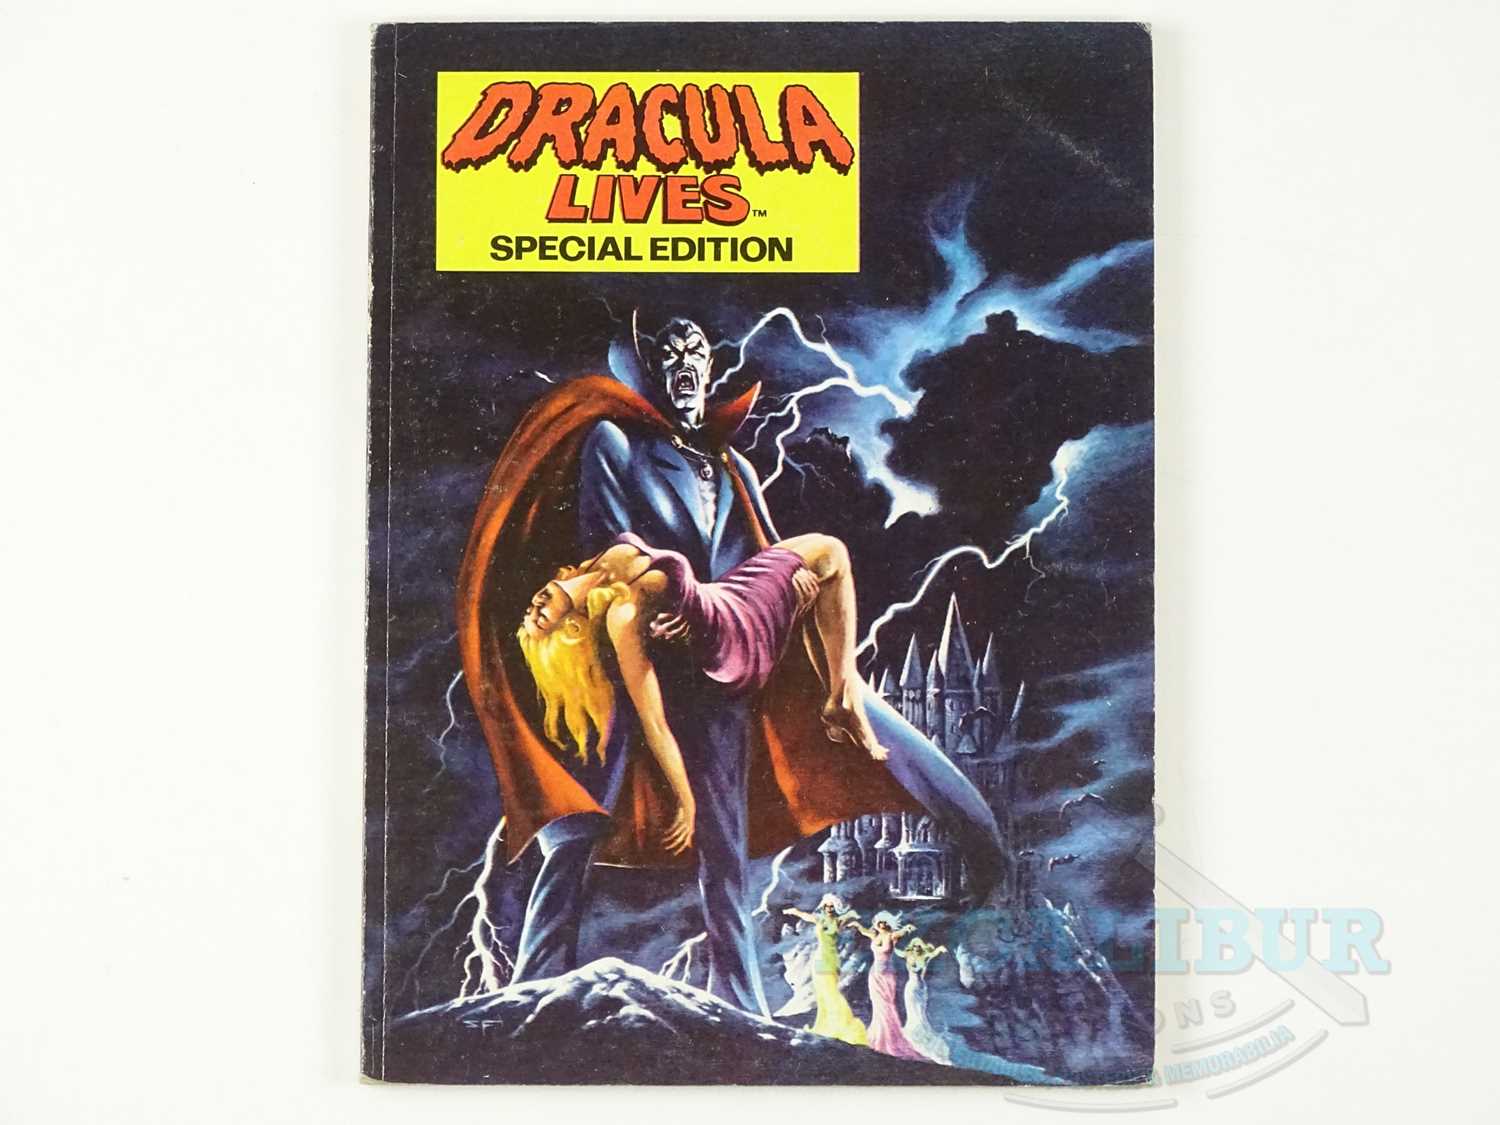 DRACULA LIVES SPECIAL EDITION (1975 - BRITISH MARVEL) Sold exclusively in the UK - Gene Colan